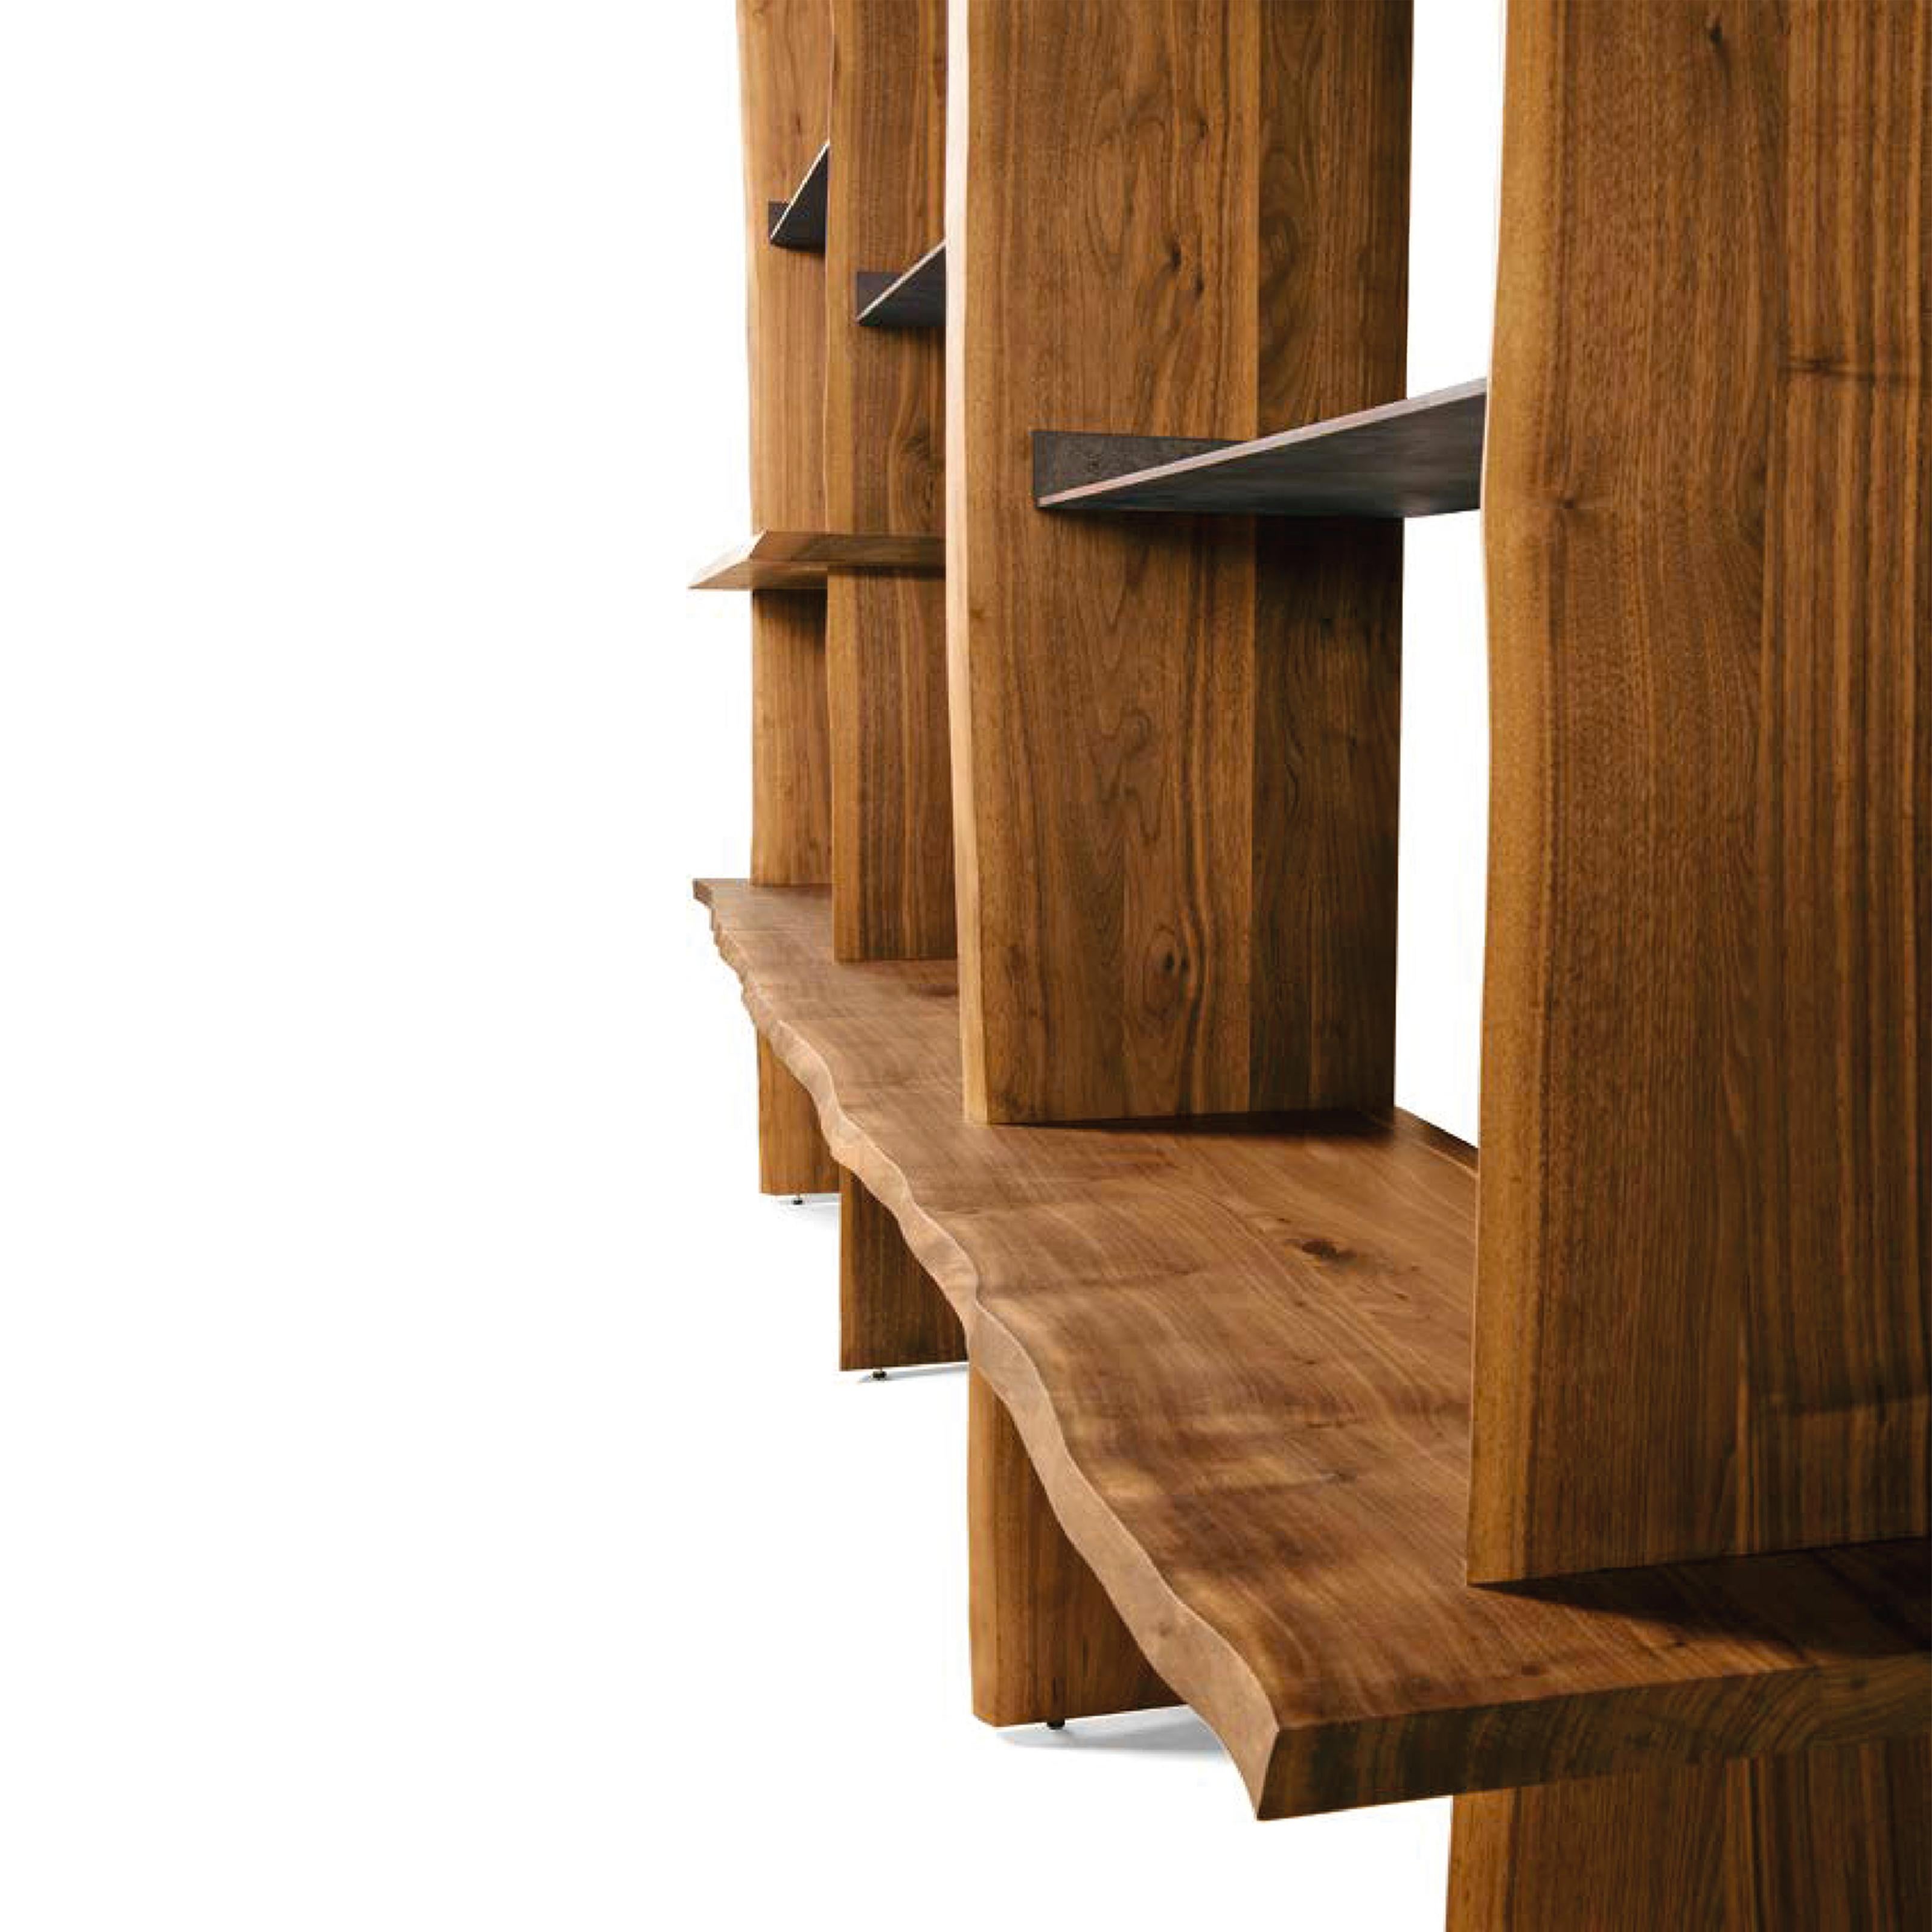 Capanna is a wall bookcase equipped with shelves and support floors and made of precious canaletto walnut finished with acrylic. The Italian artisan tradition is reinterpreted in a contemporary design to create a refined piece of wooden furniture.